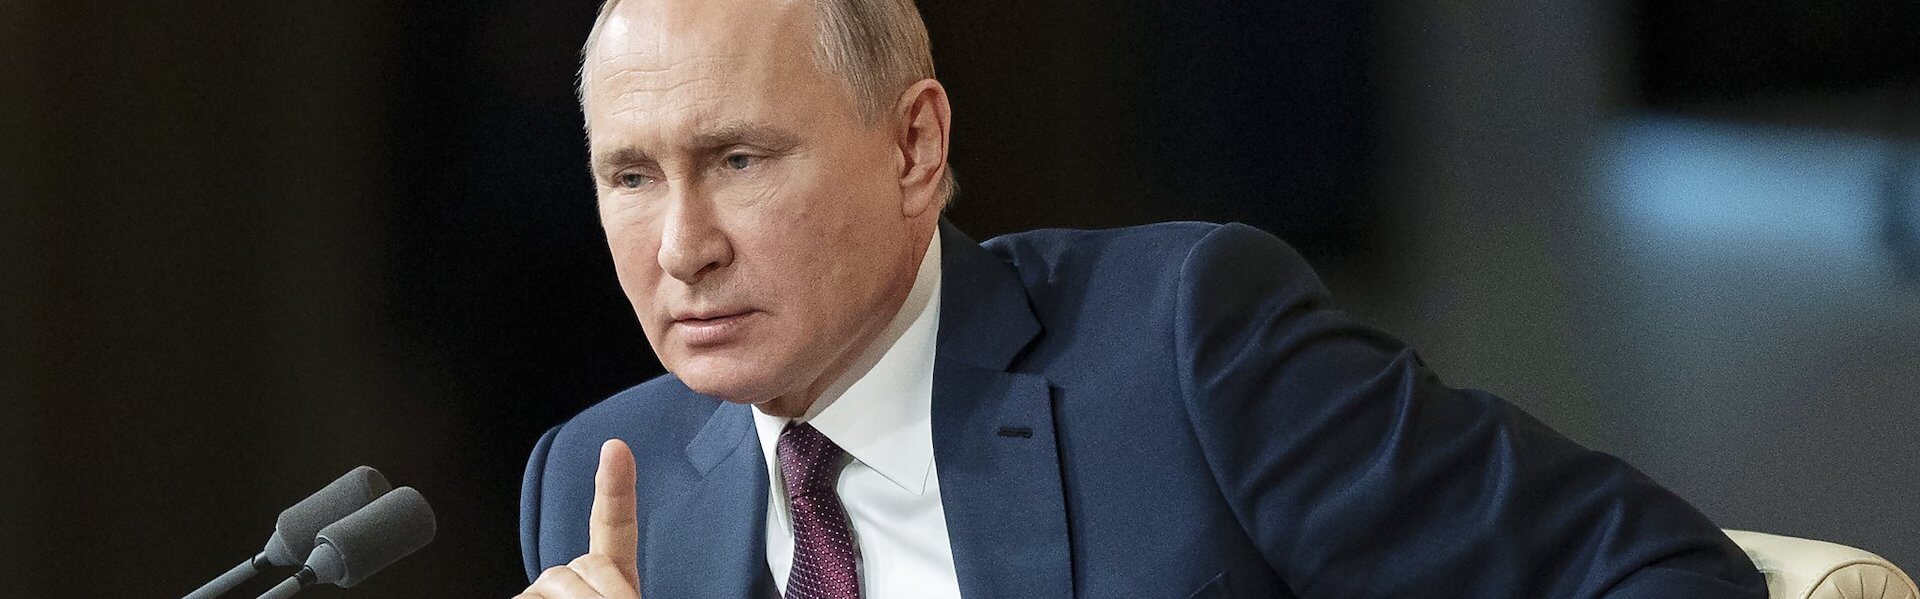 How Vladimir Putin provokes—and complicates—the struggle against autocracy